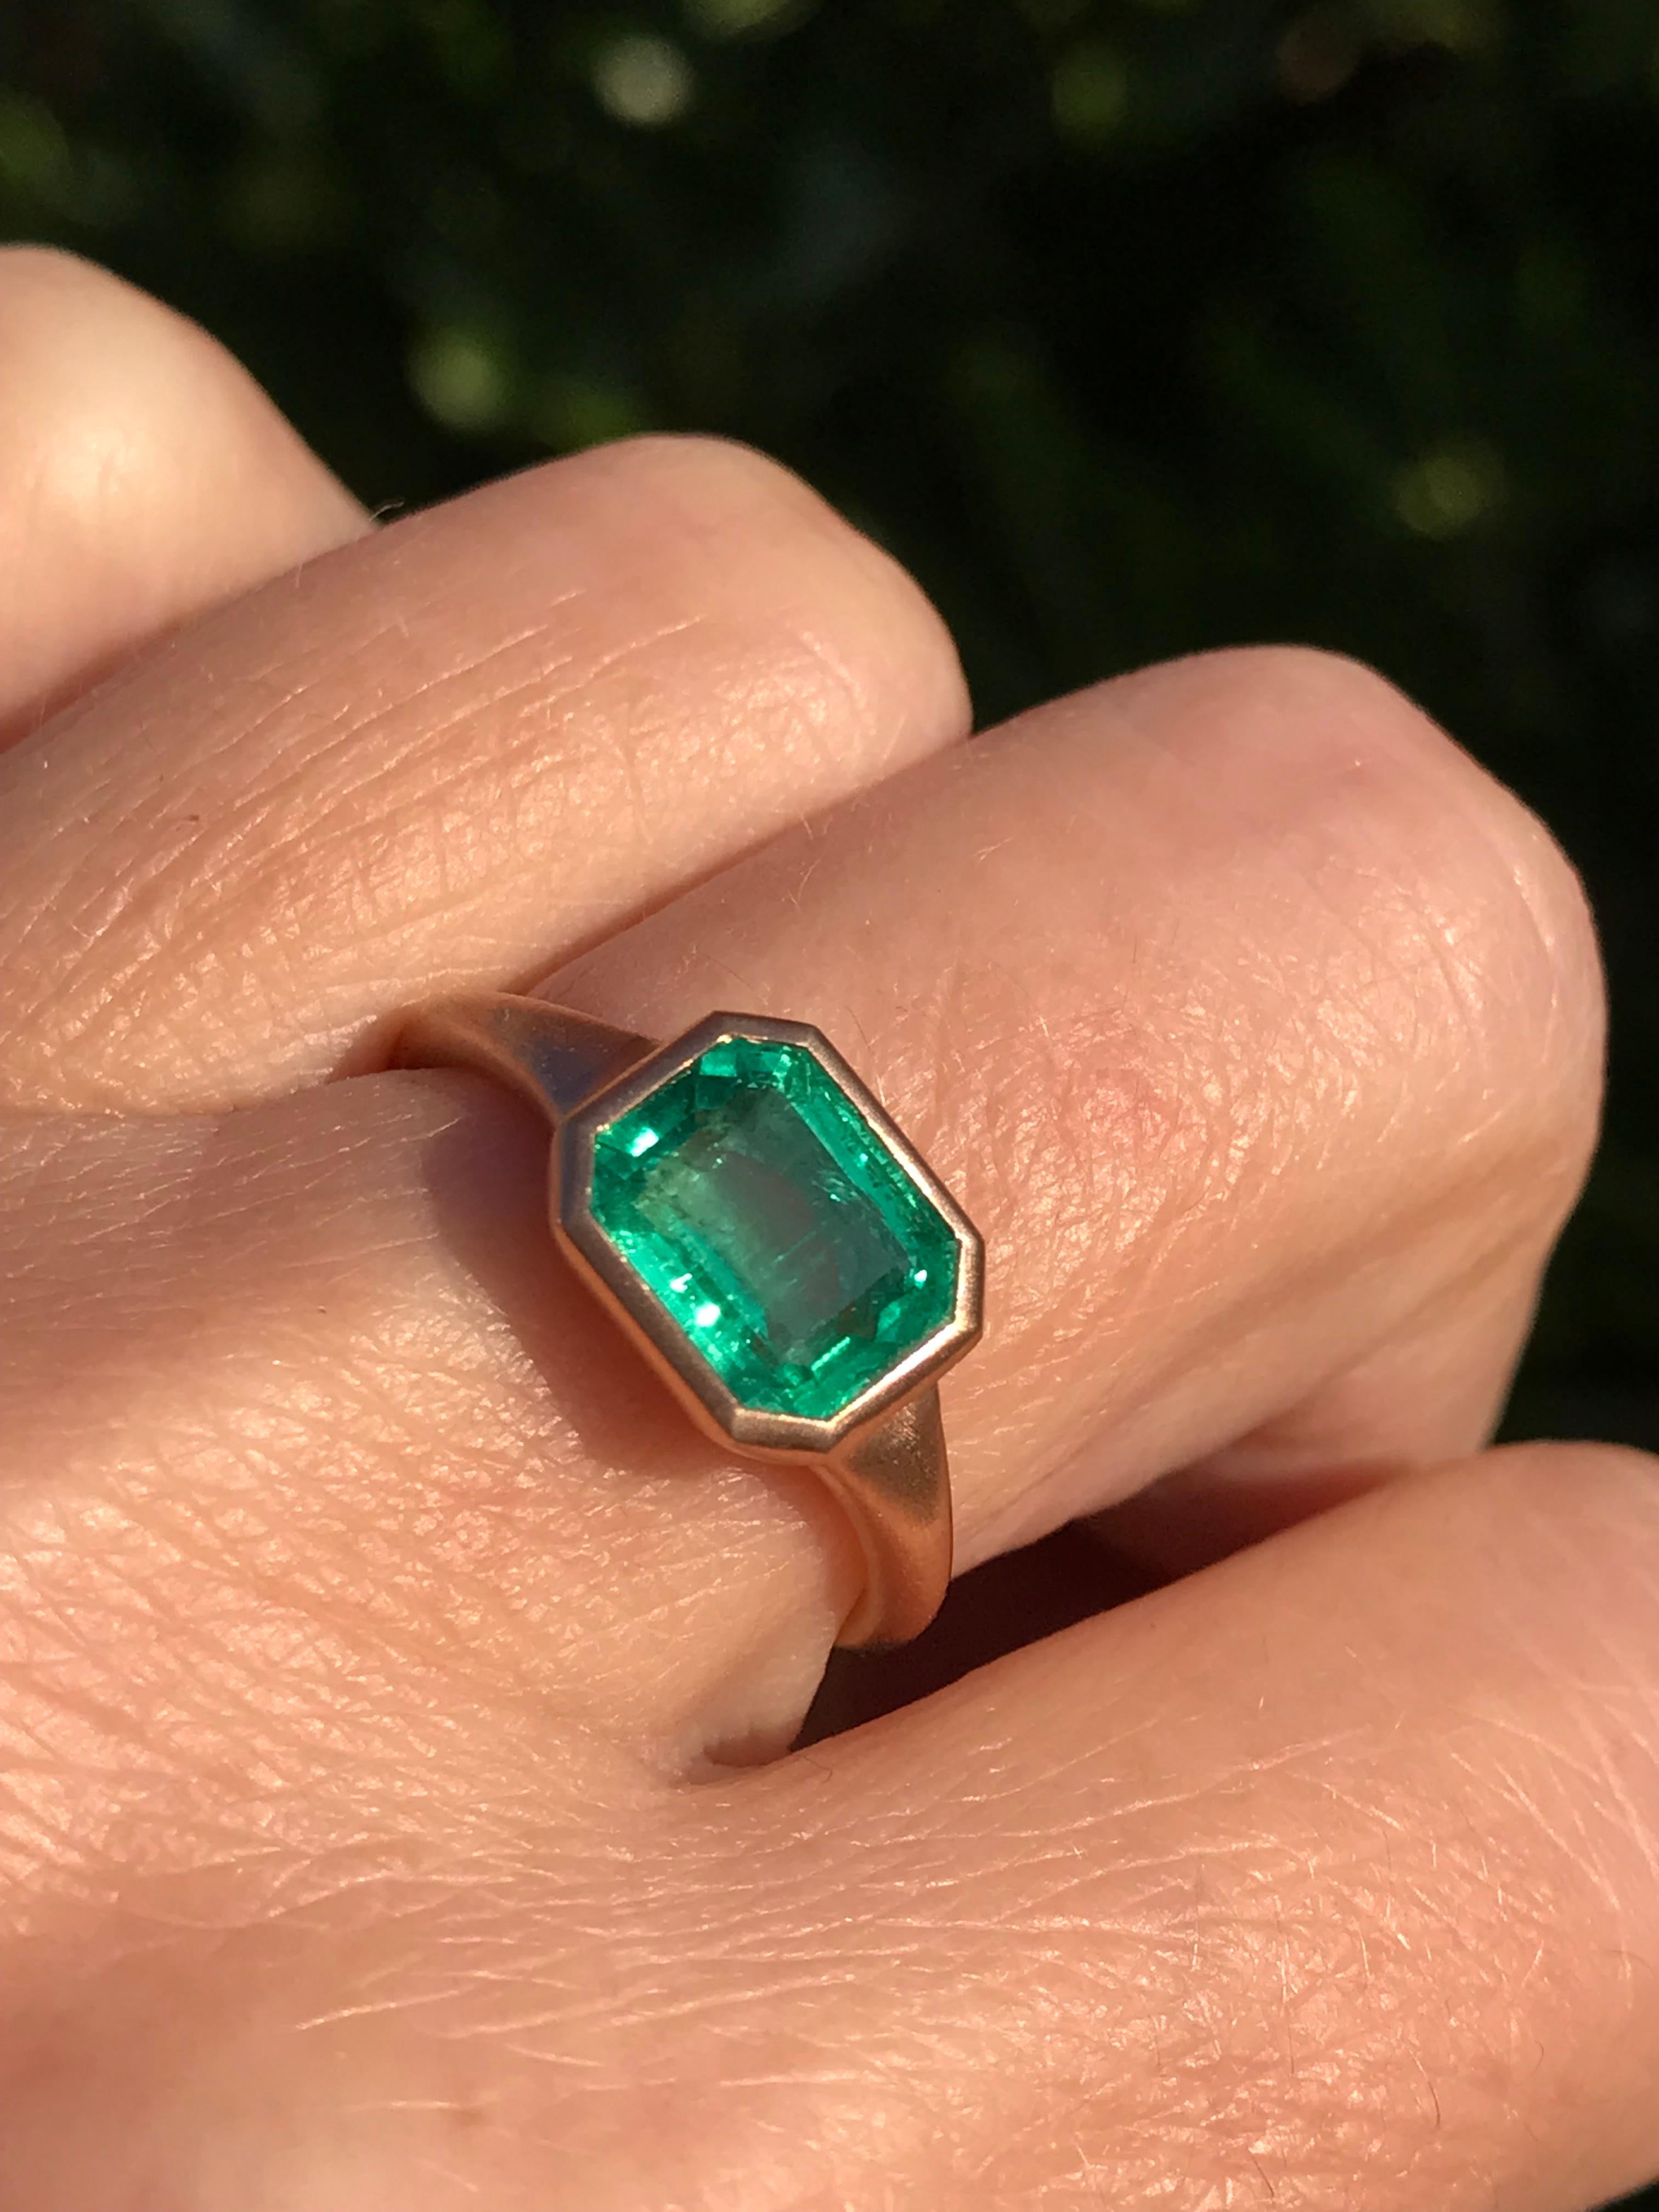 Dalben design One of a Kind 18k rose gold satin finishing ring with a 2,38 carat bezel-set emerald cut emerald. 
Ring size6 3/4+ USA , 54 EU  re-sizable to most finger sizes. 
Bezel stone dimensions :
width 10,3 mm
height 8,5 mm
The ring has been